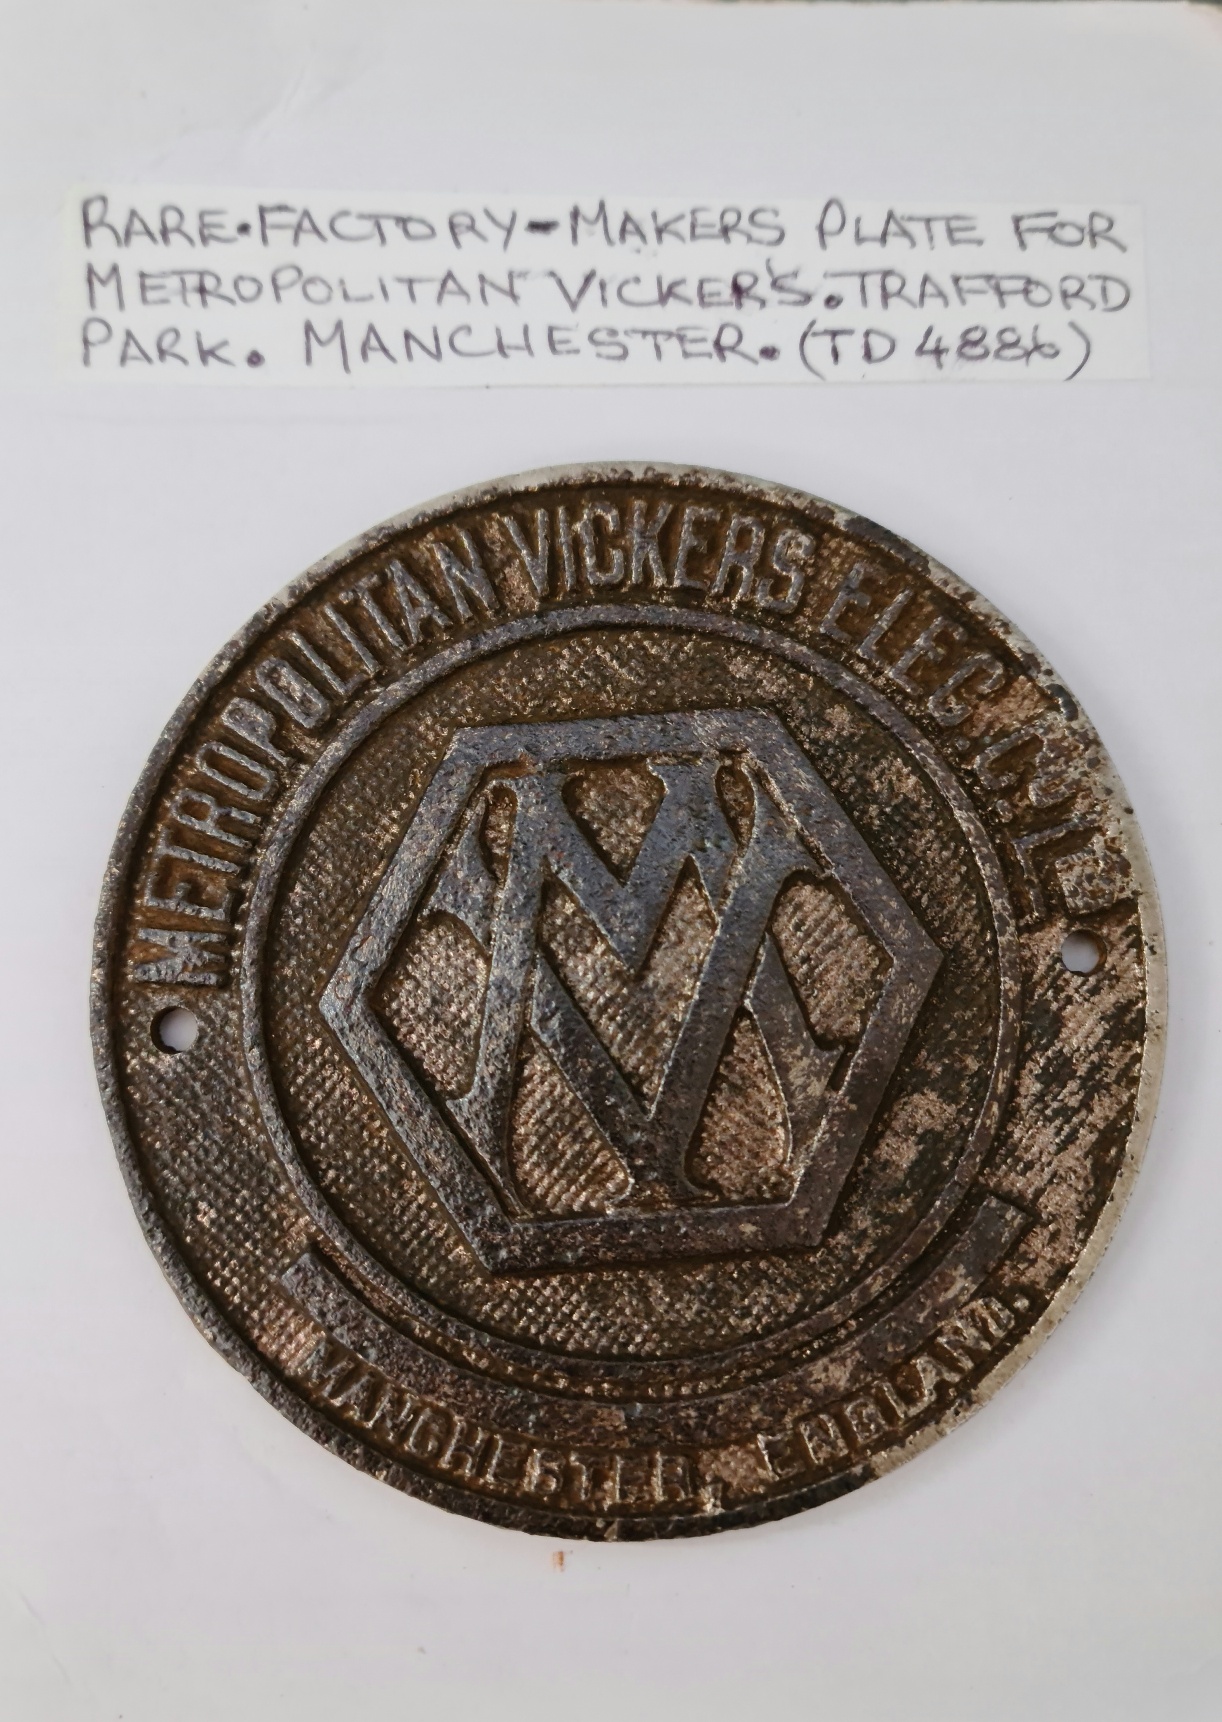 A Factory makers plate for Metropolitan Vickers, Trafford Park Manchester (TD 4886)